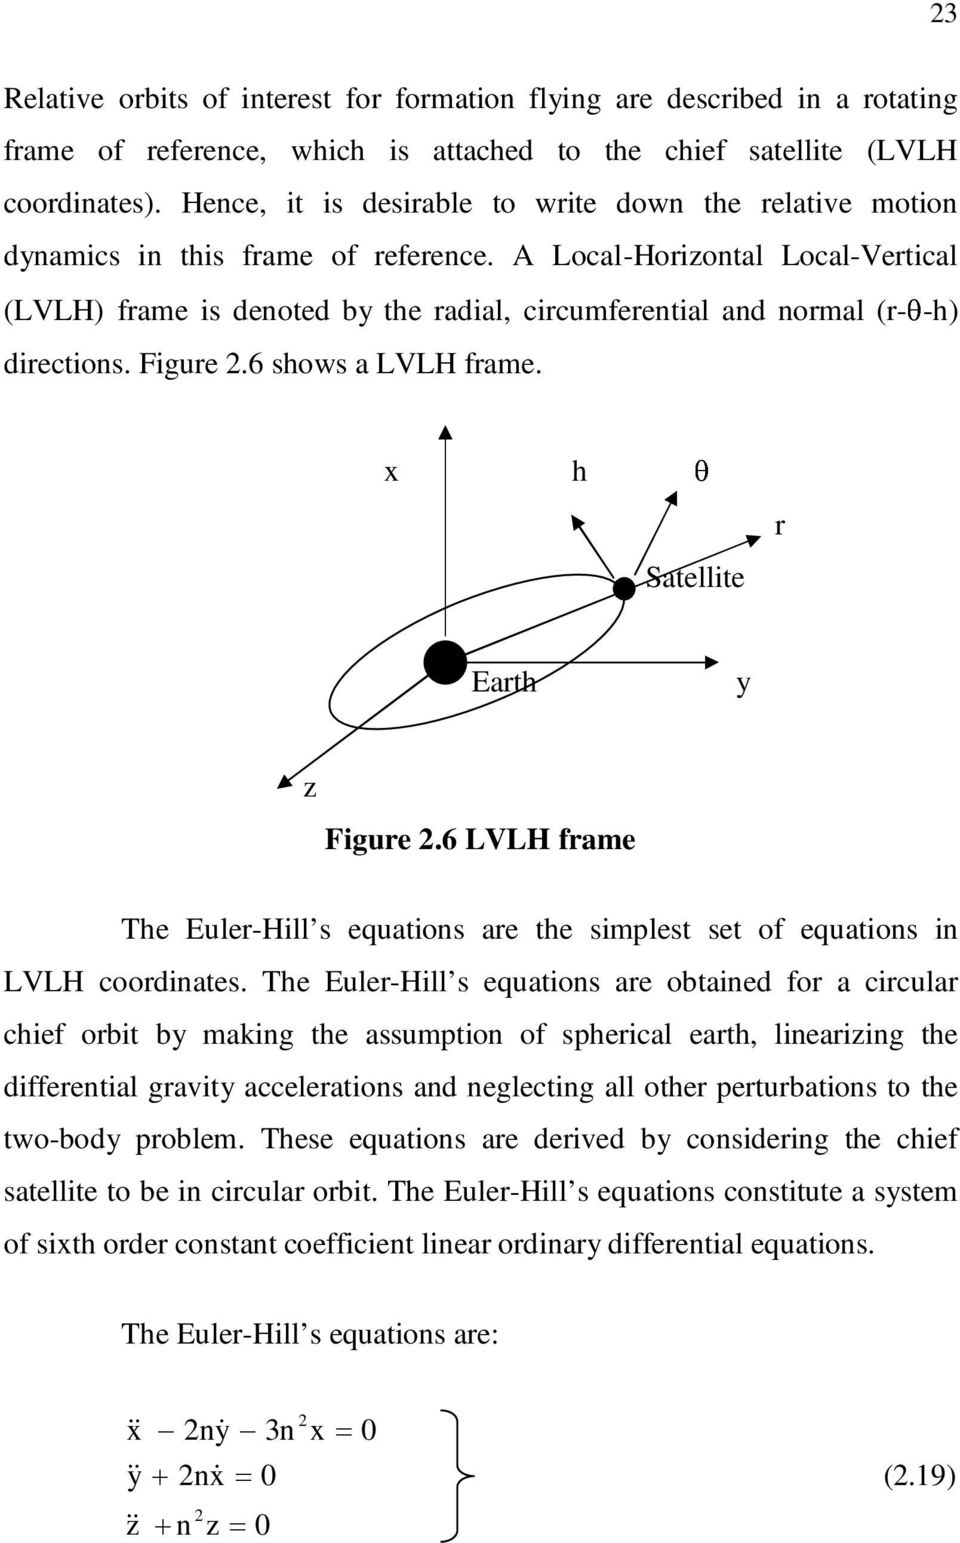 A Local-Horizontal Local-Vertical (LVLH) frame is denoted by the radial, circumferential and normal (r- -h) directions. Figure 2.6 shows a LVLH frame. x h r Satellite Earth y z Figure 2.